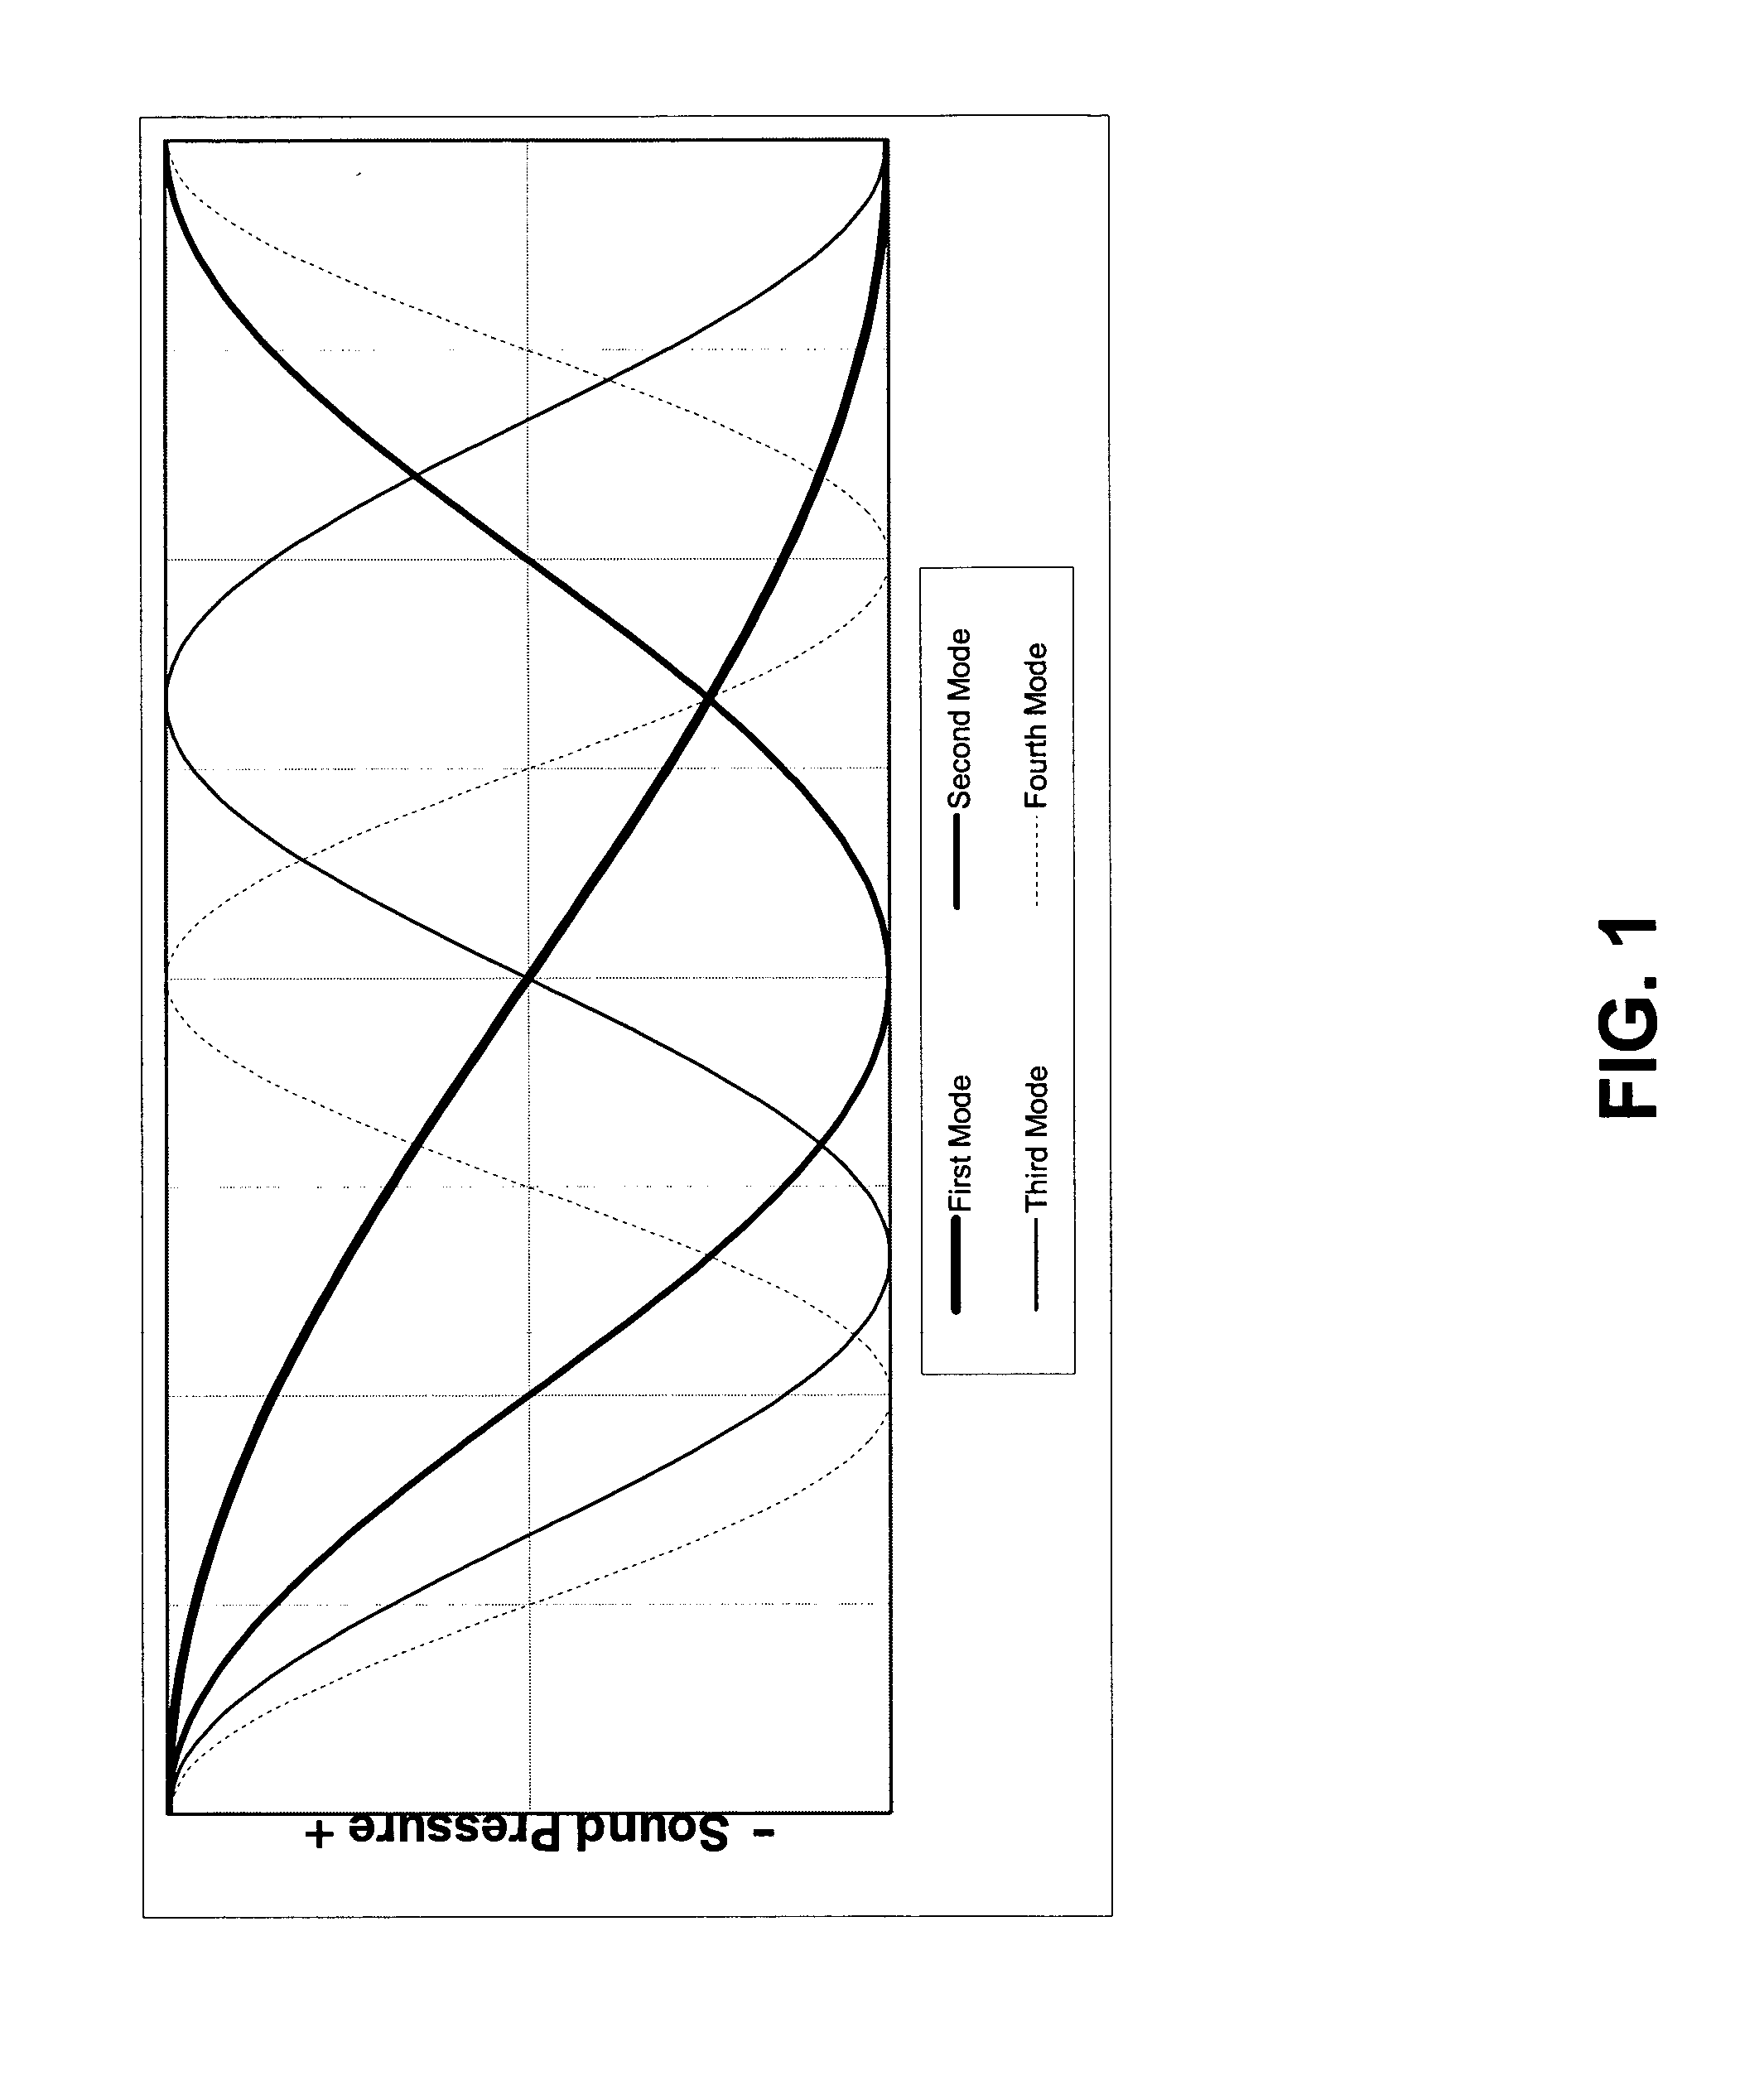 System for selecting speaker locations in an audio system